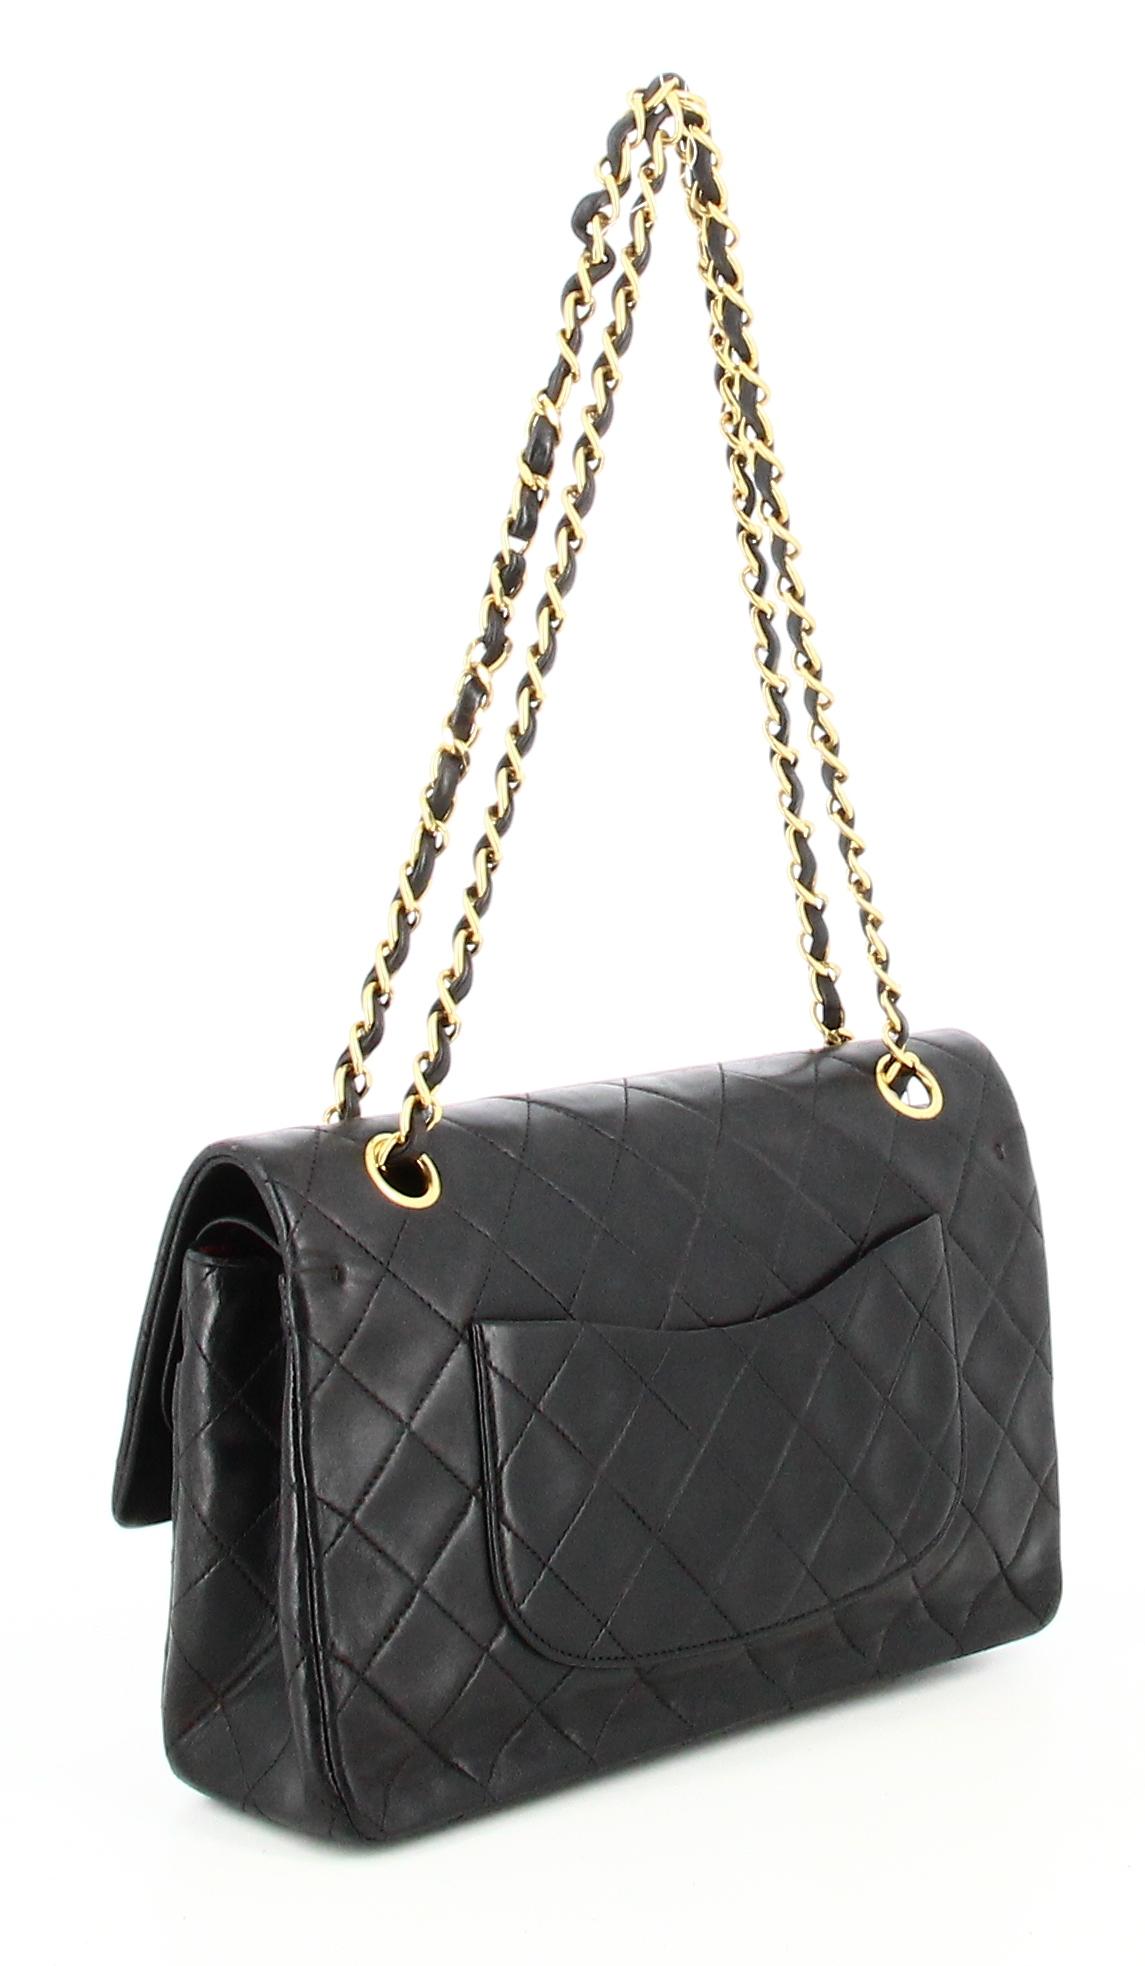 1991 Chanel Timeless Handbag In Black Quilted Leather  1